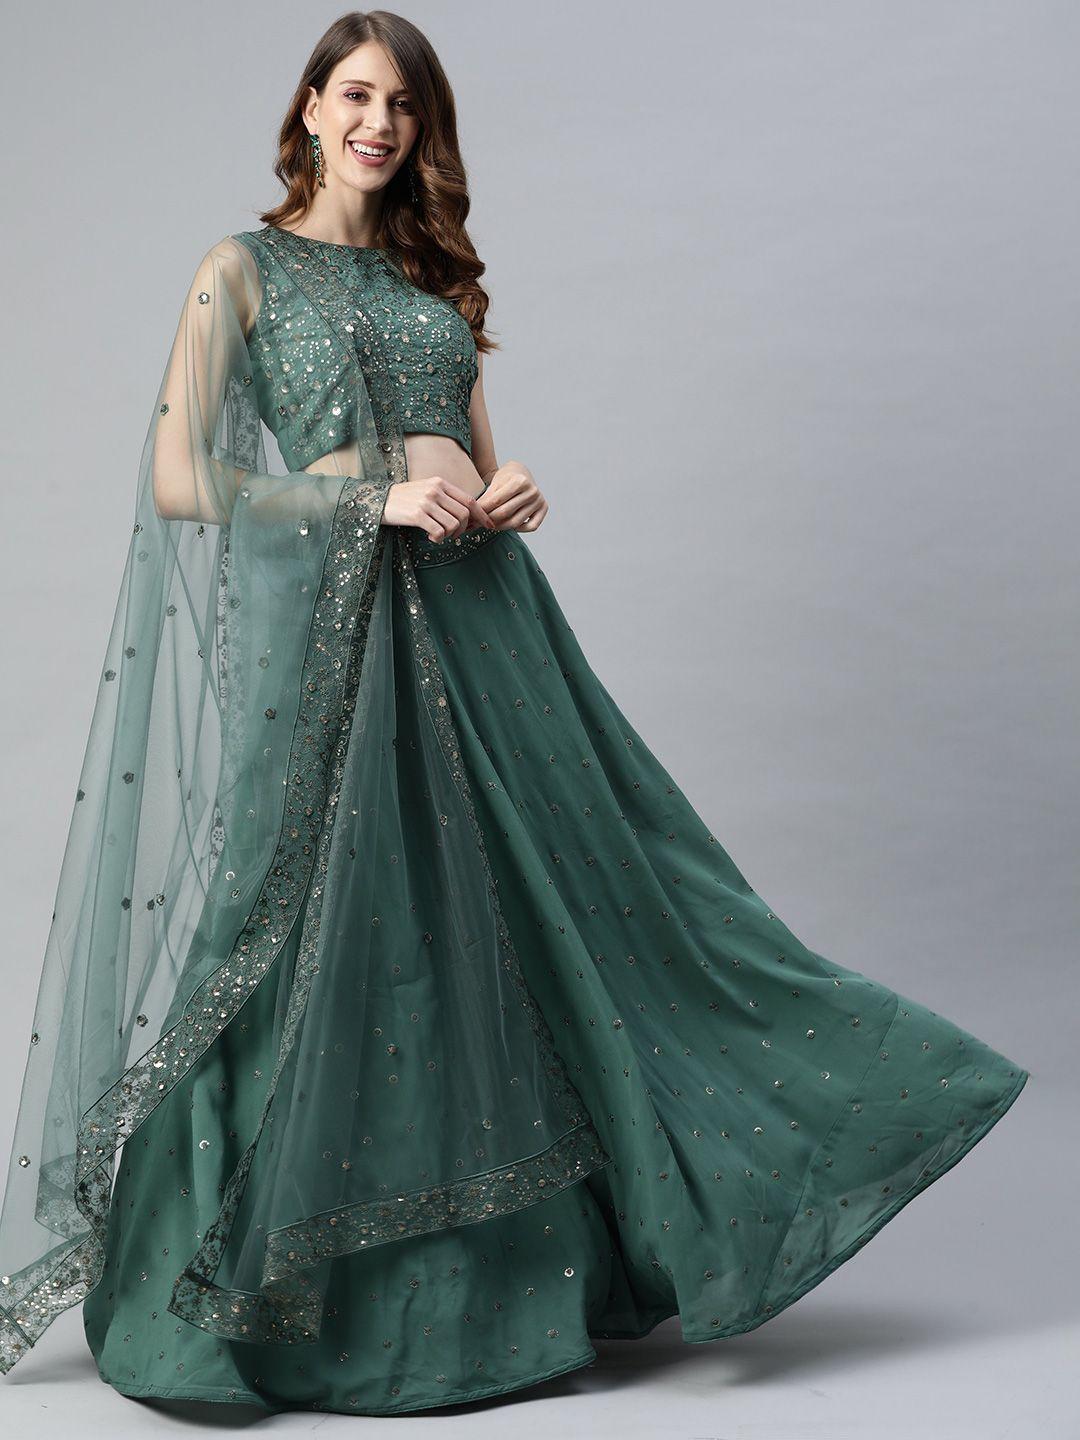 here&now embellished sequinned semi-stitched lehenga & unstitched blouse with dupatta